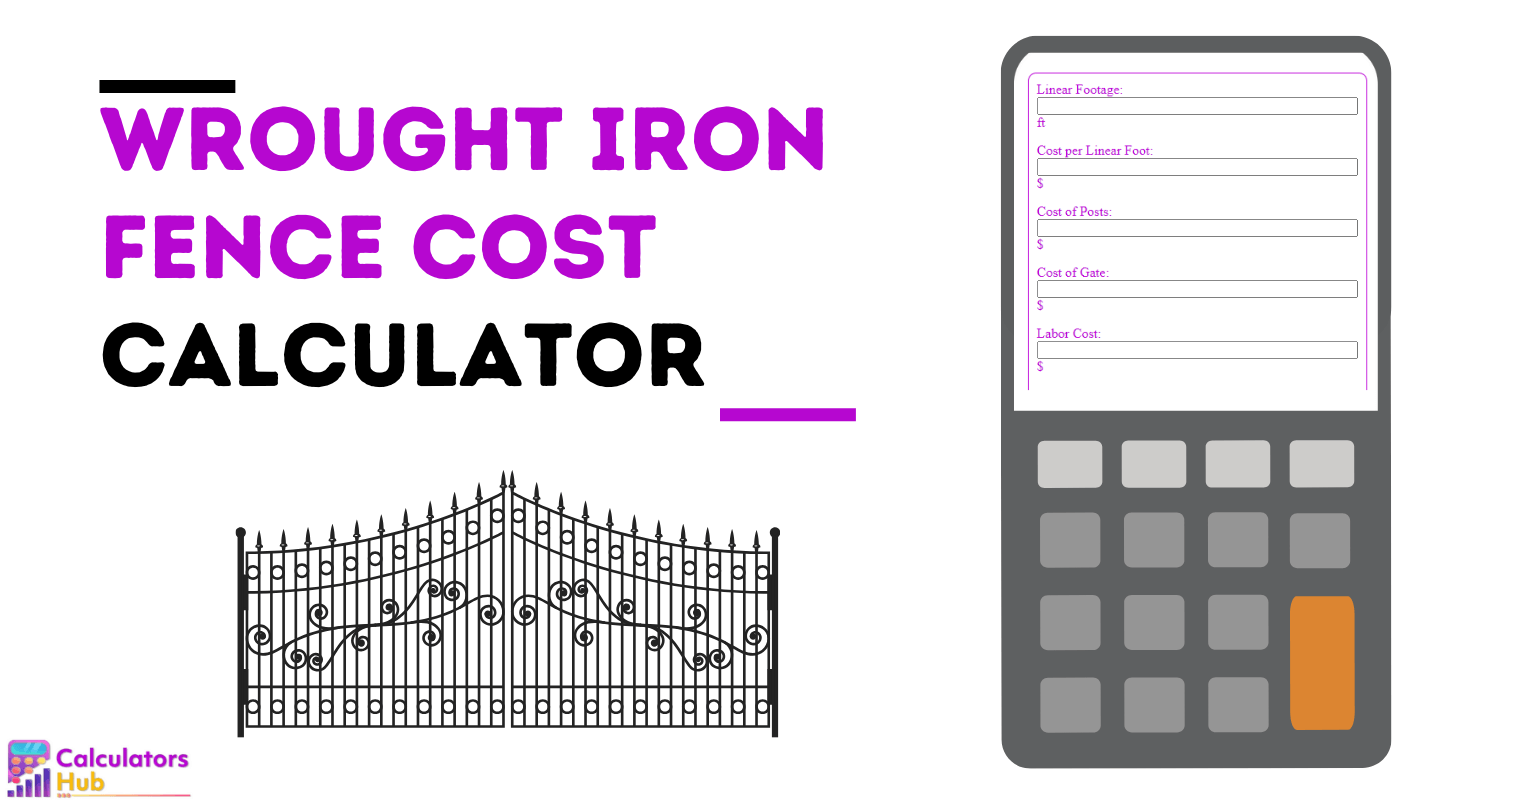 Wrought Iron Fence Cost Calculator